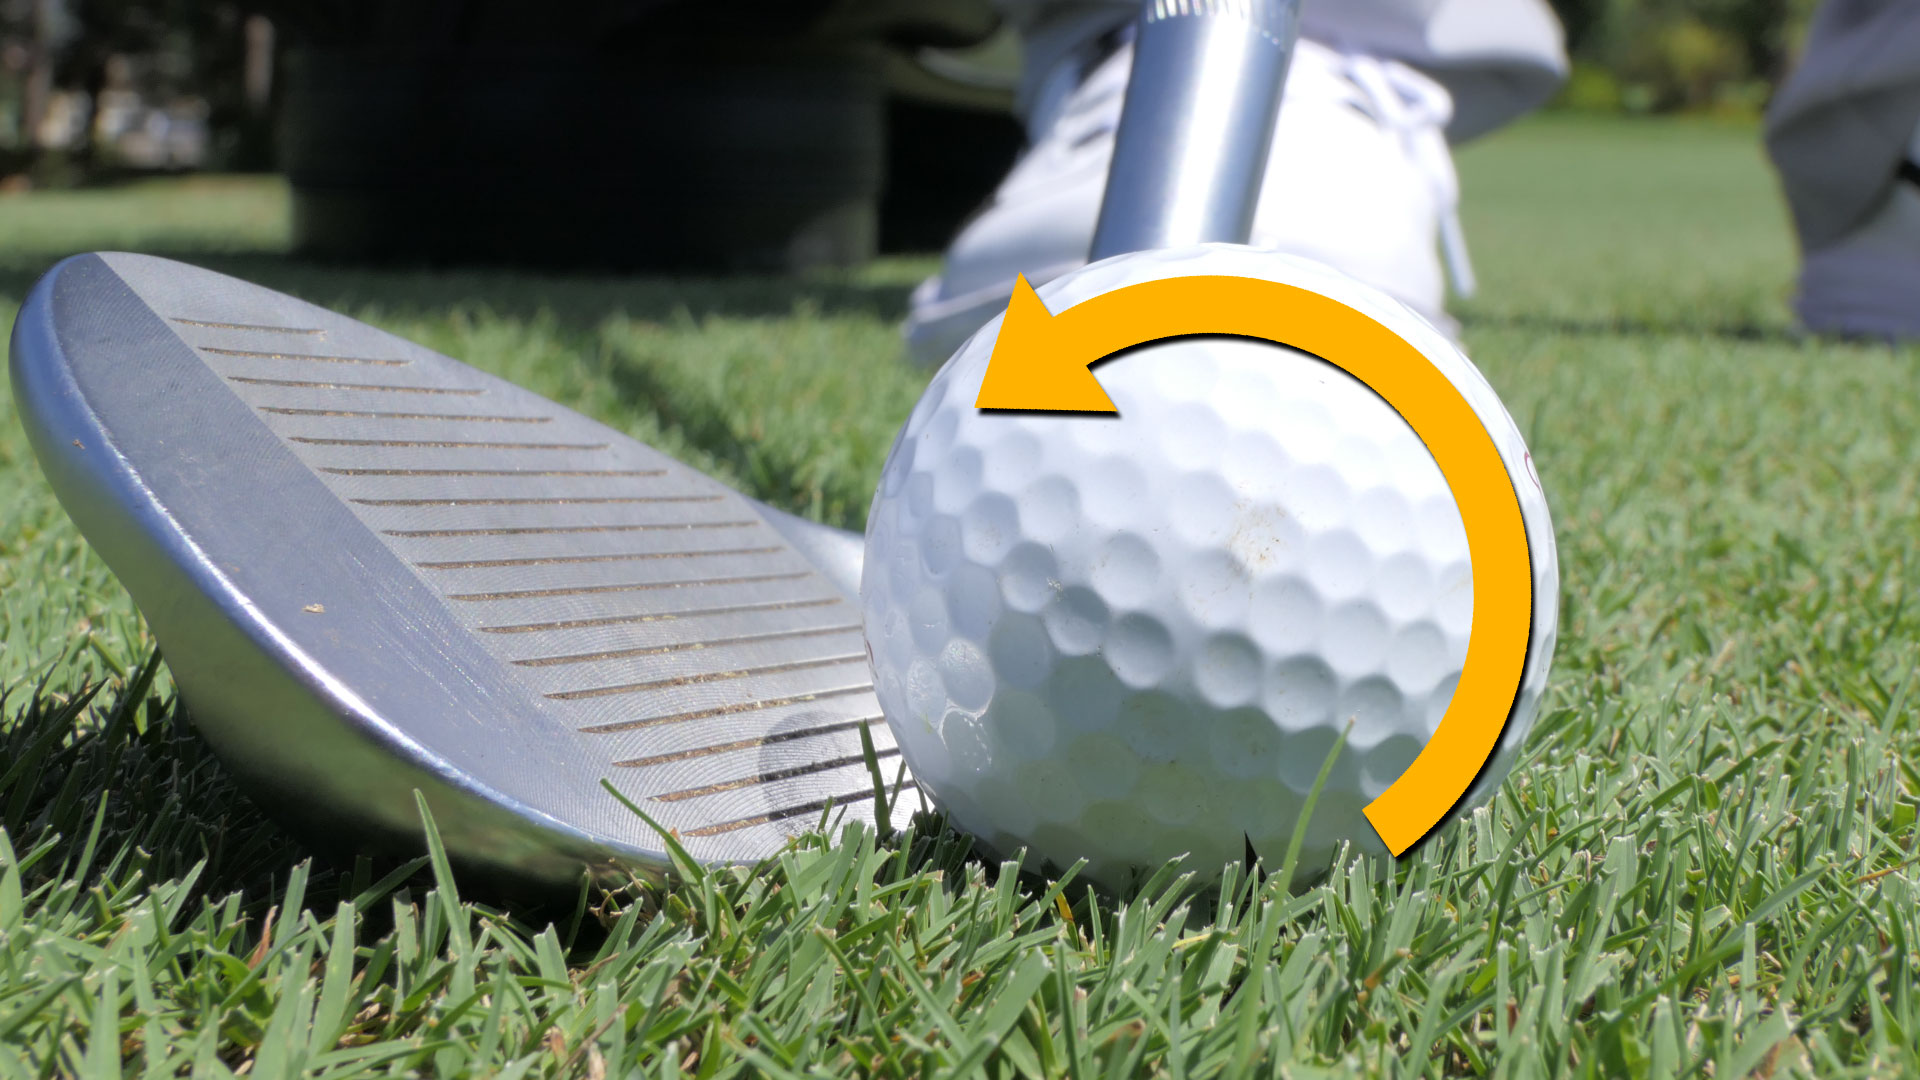 Master the Wedge: How to Put Backspin on a Golf Ball